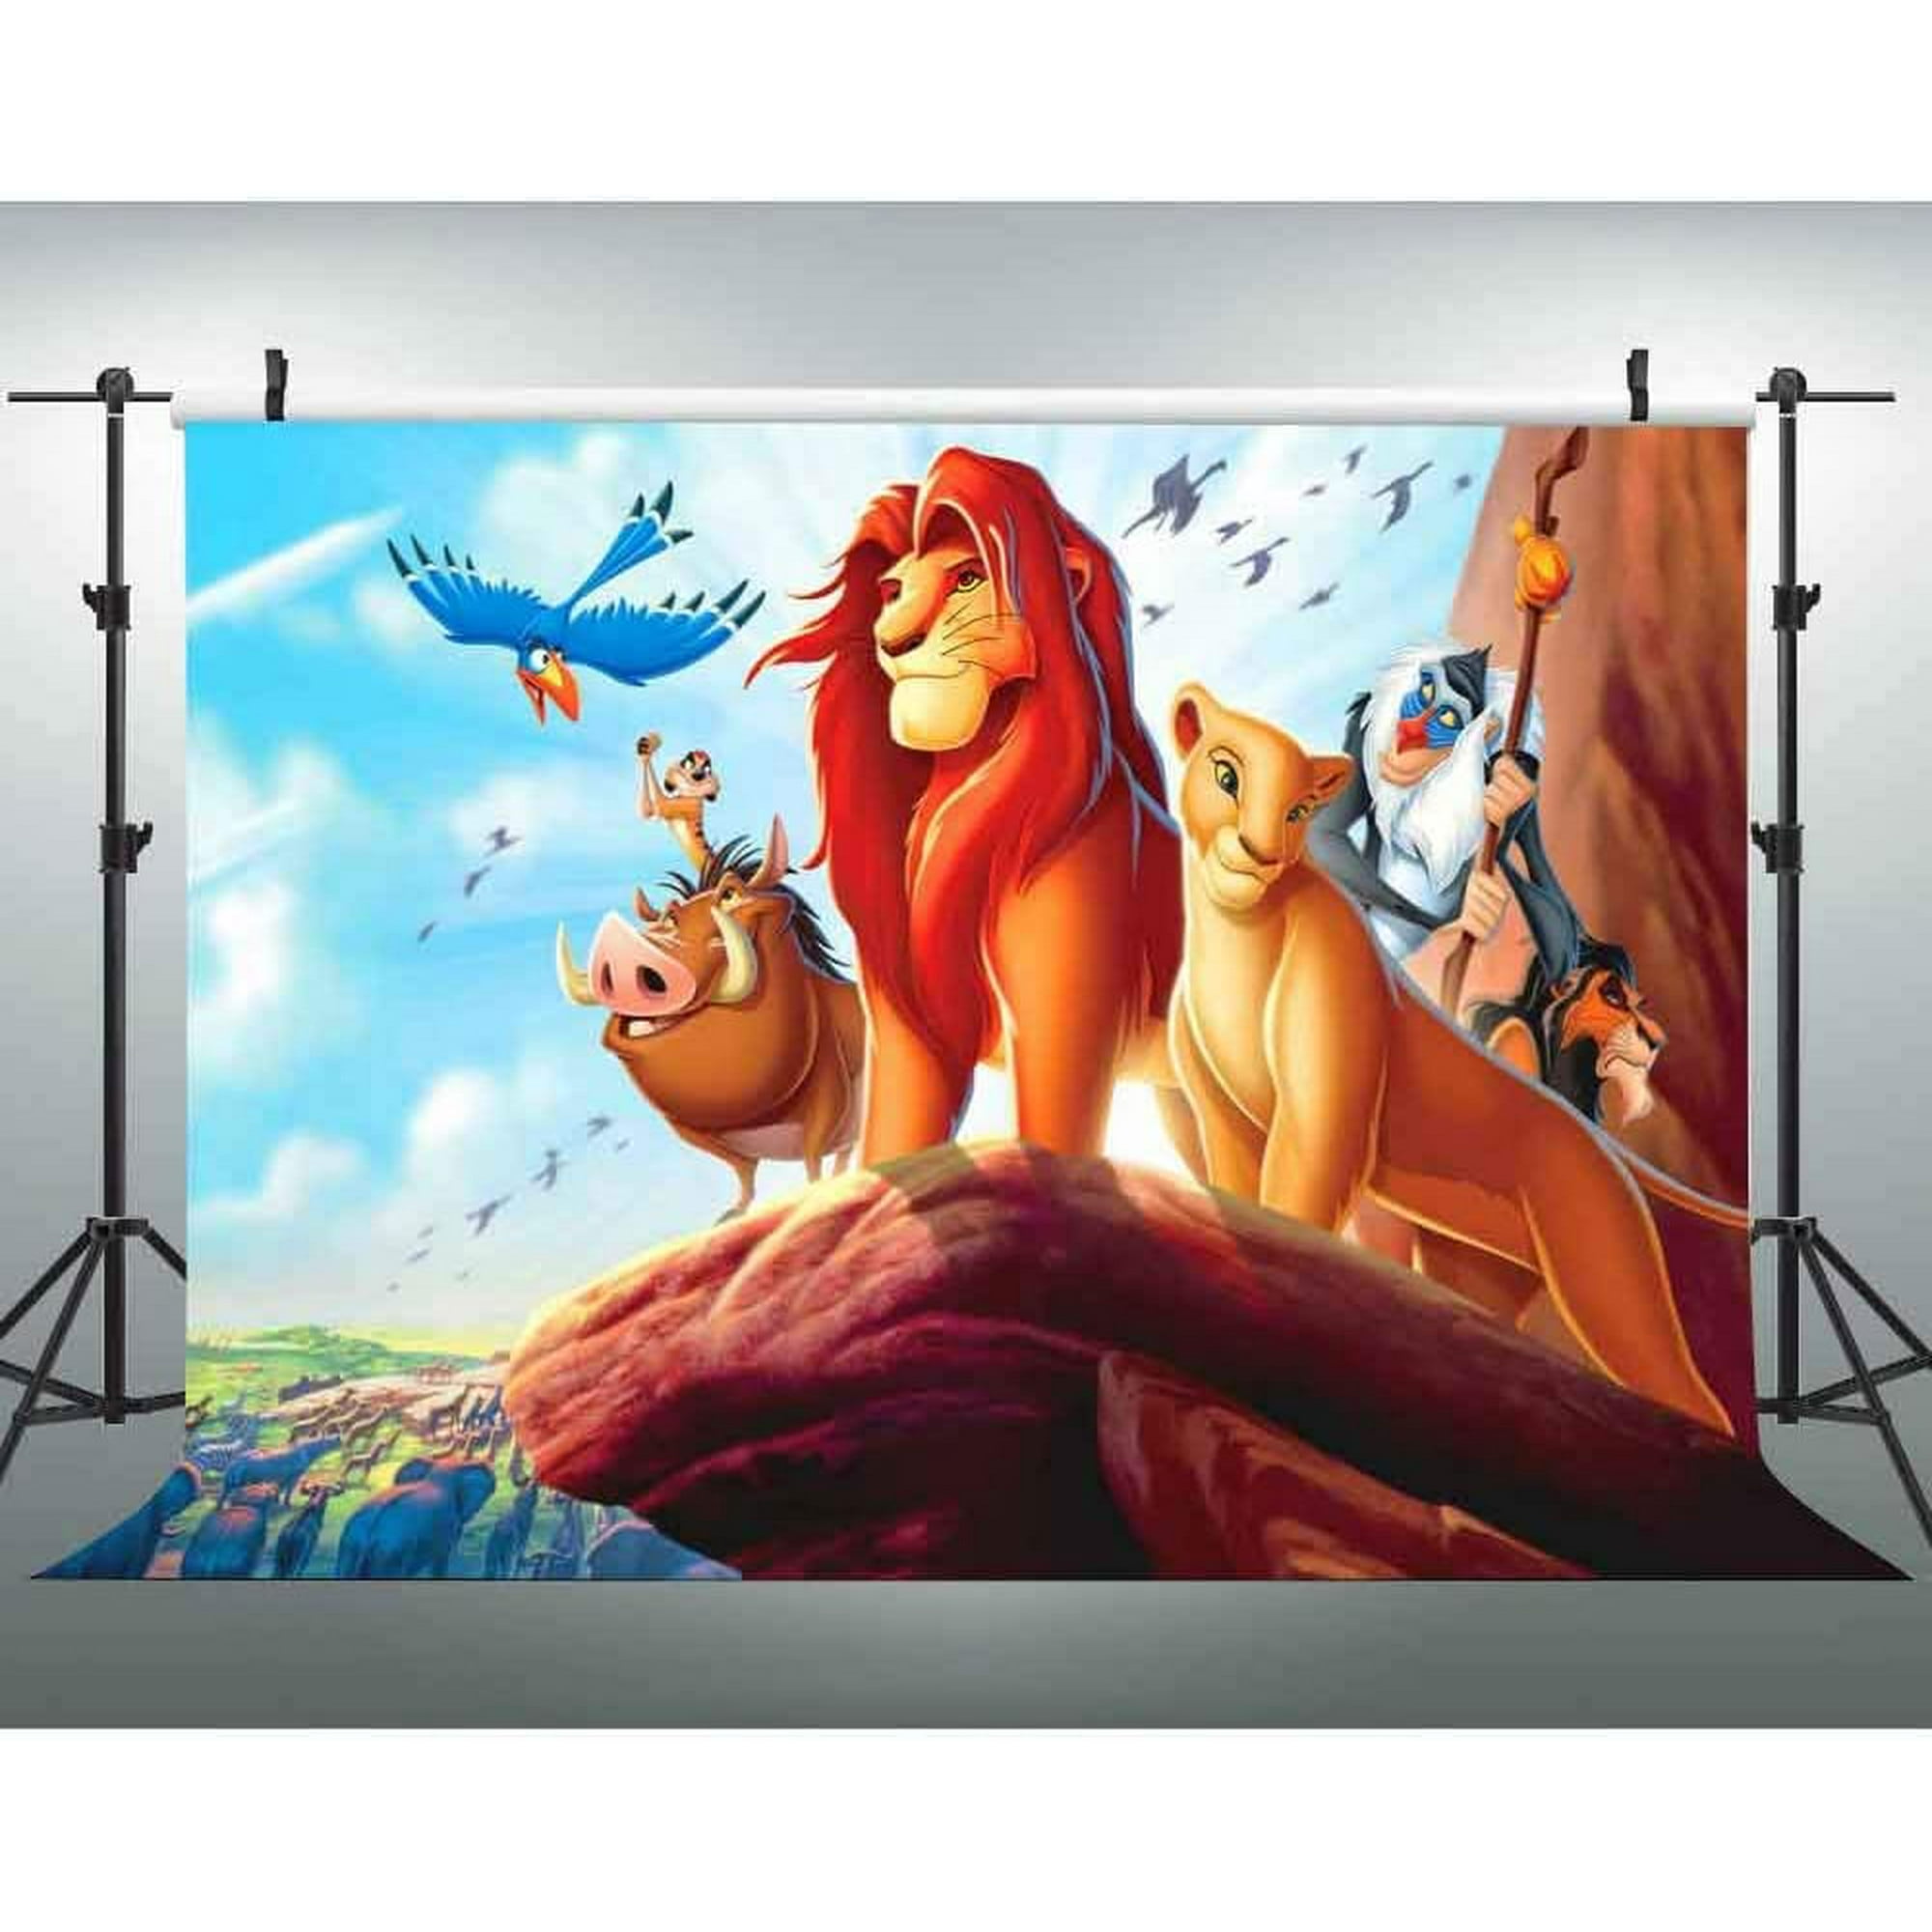 EOA 7x5FT Lion King Backdrop for Baby Photography Background or Children  Birthday Party Decoration Art Studio | Walmart Canada